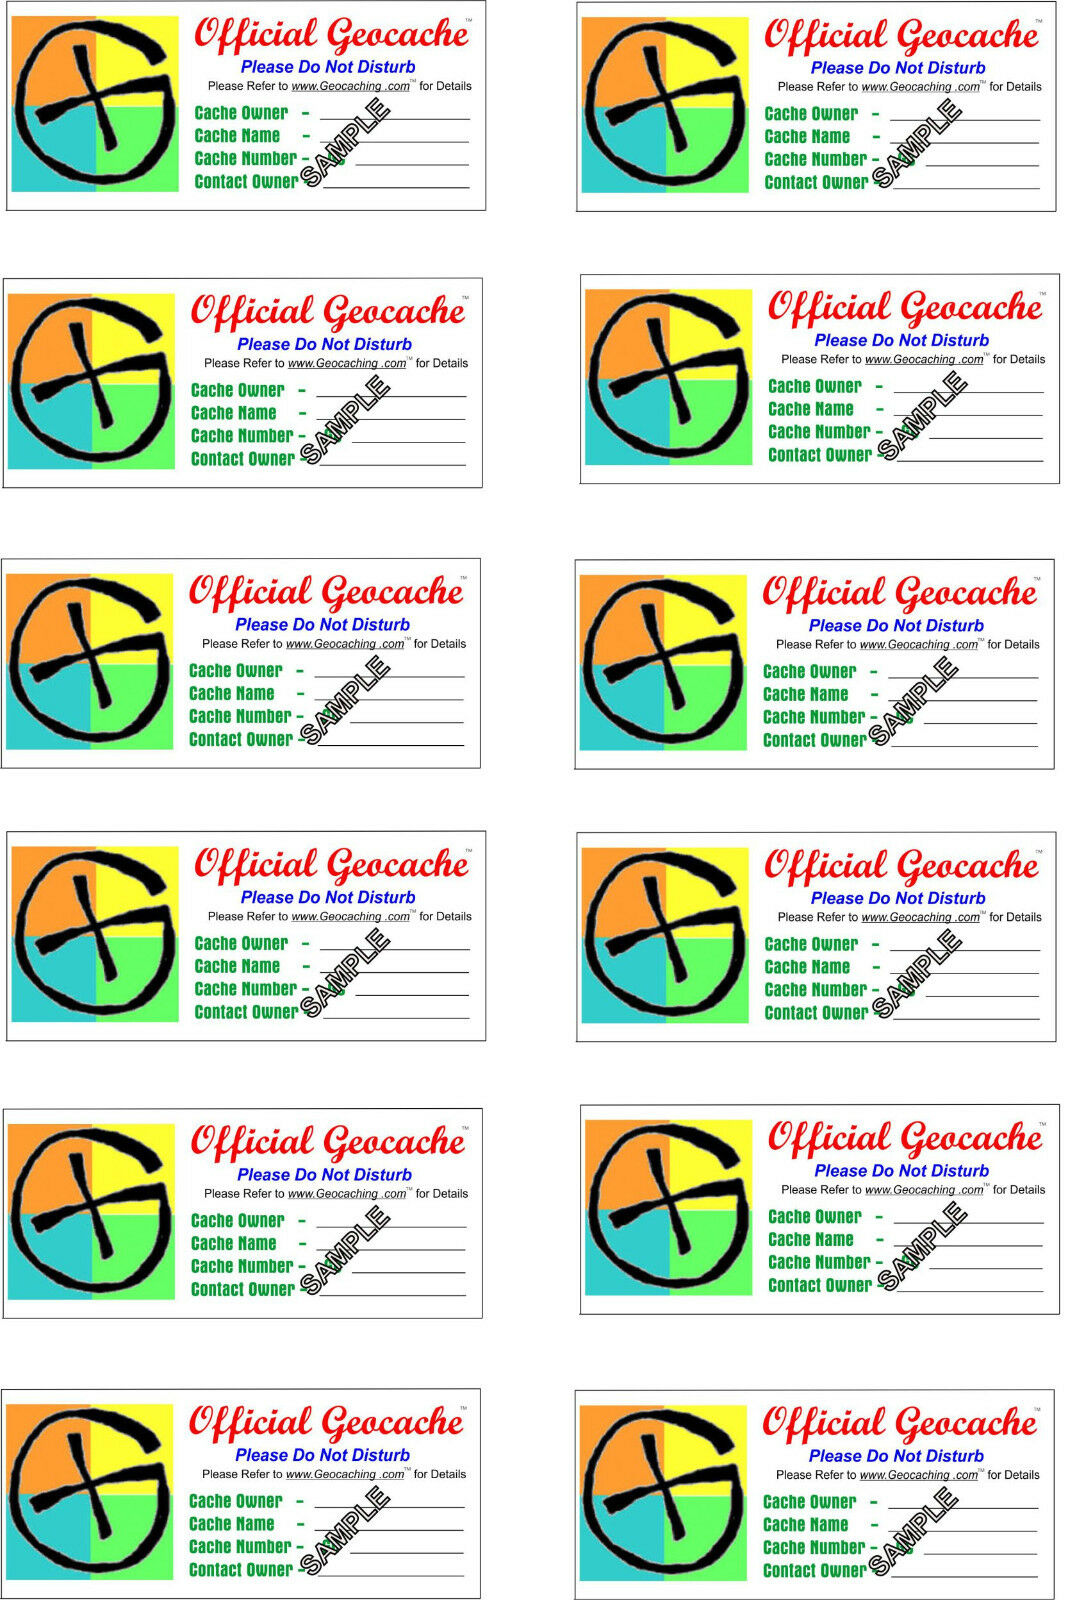 Practical Geocaching® – 12 Official Geocache Labels - Gx Logo - Free Freight!